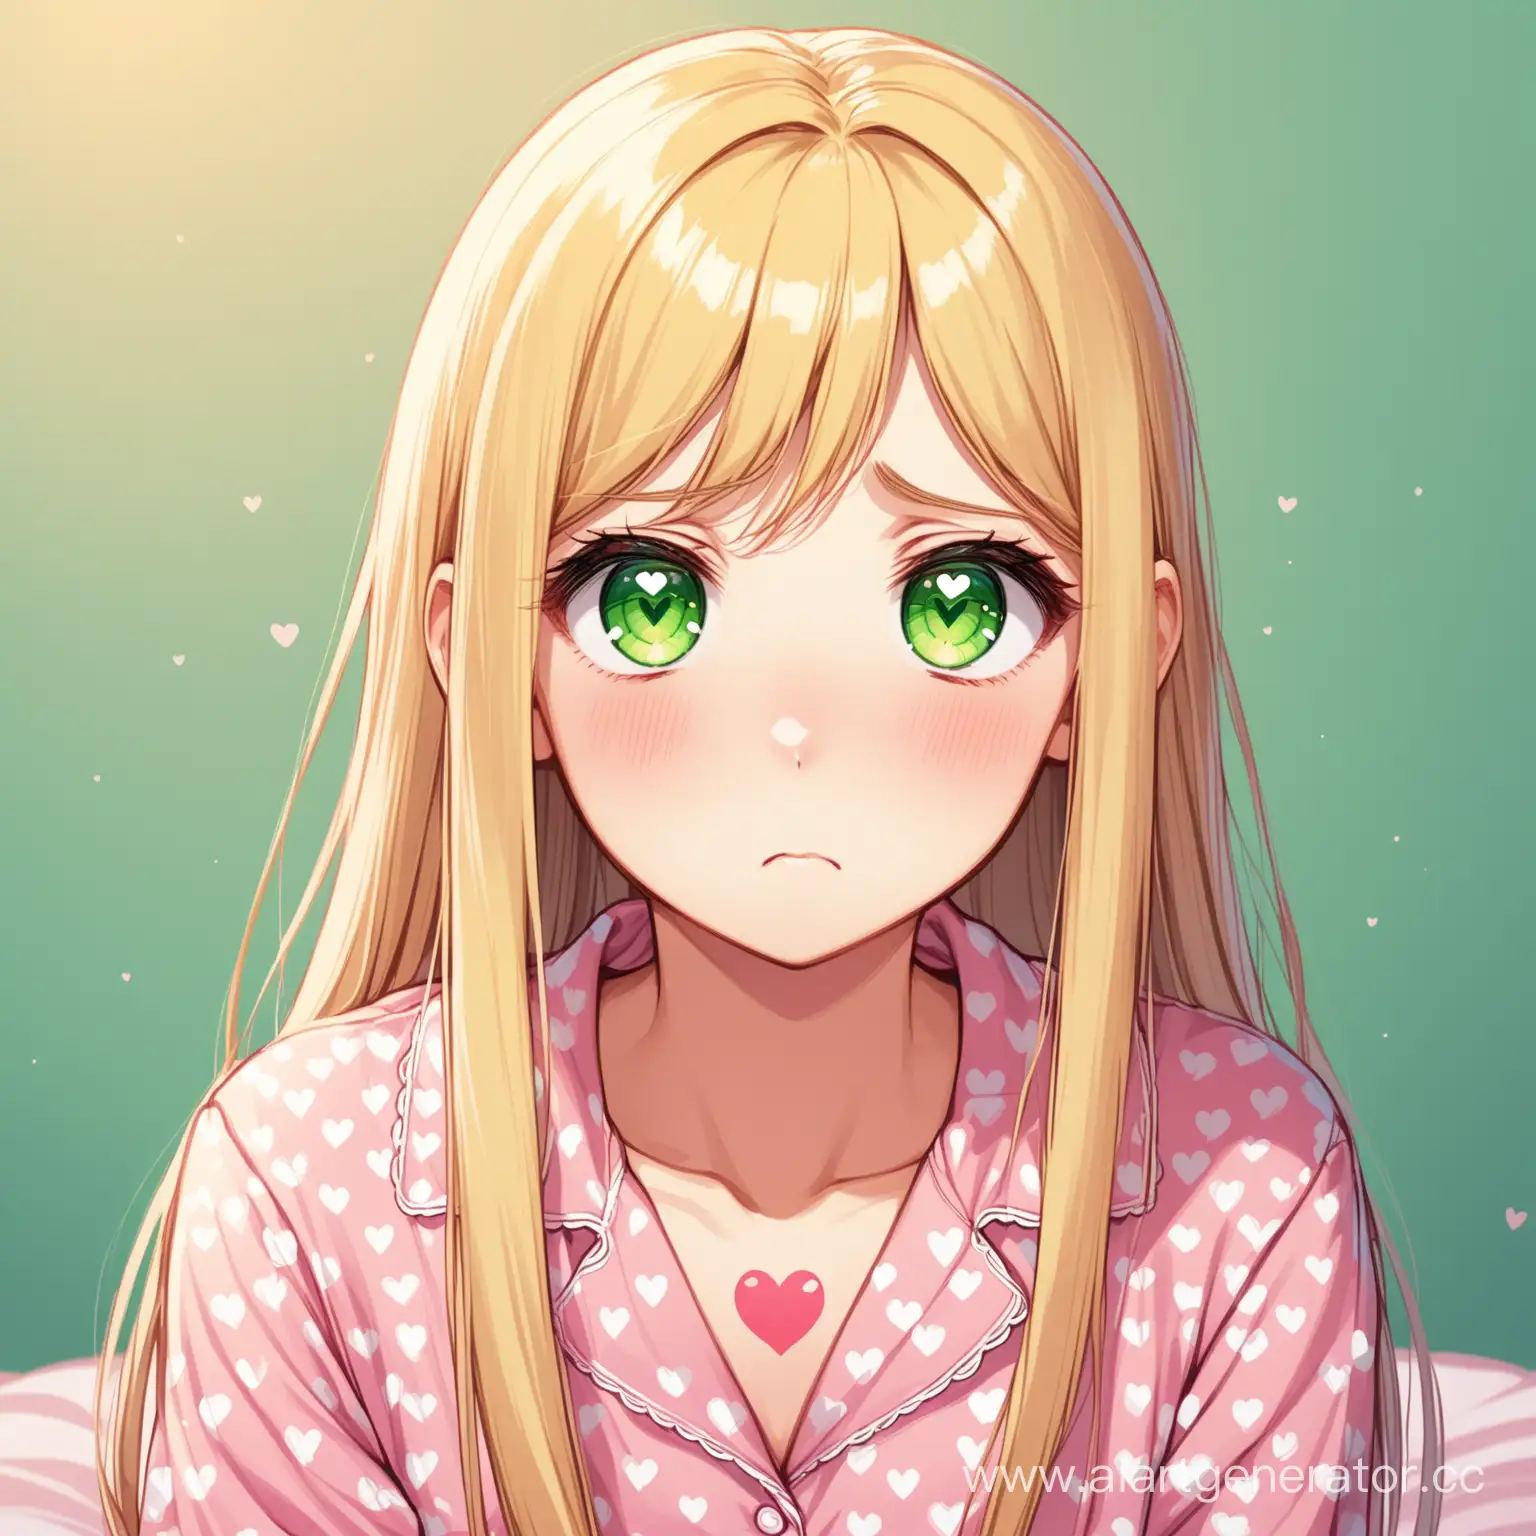 A girl, long straight blonde hair and big green eyes, she is dressed in closed pajamas with a heart pattern, She looks desperate and sad.